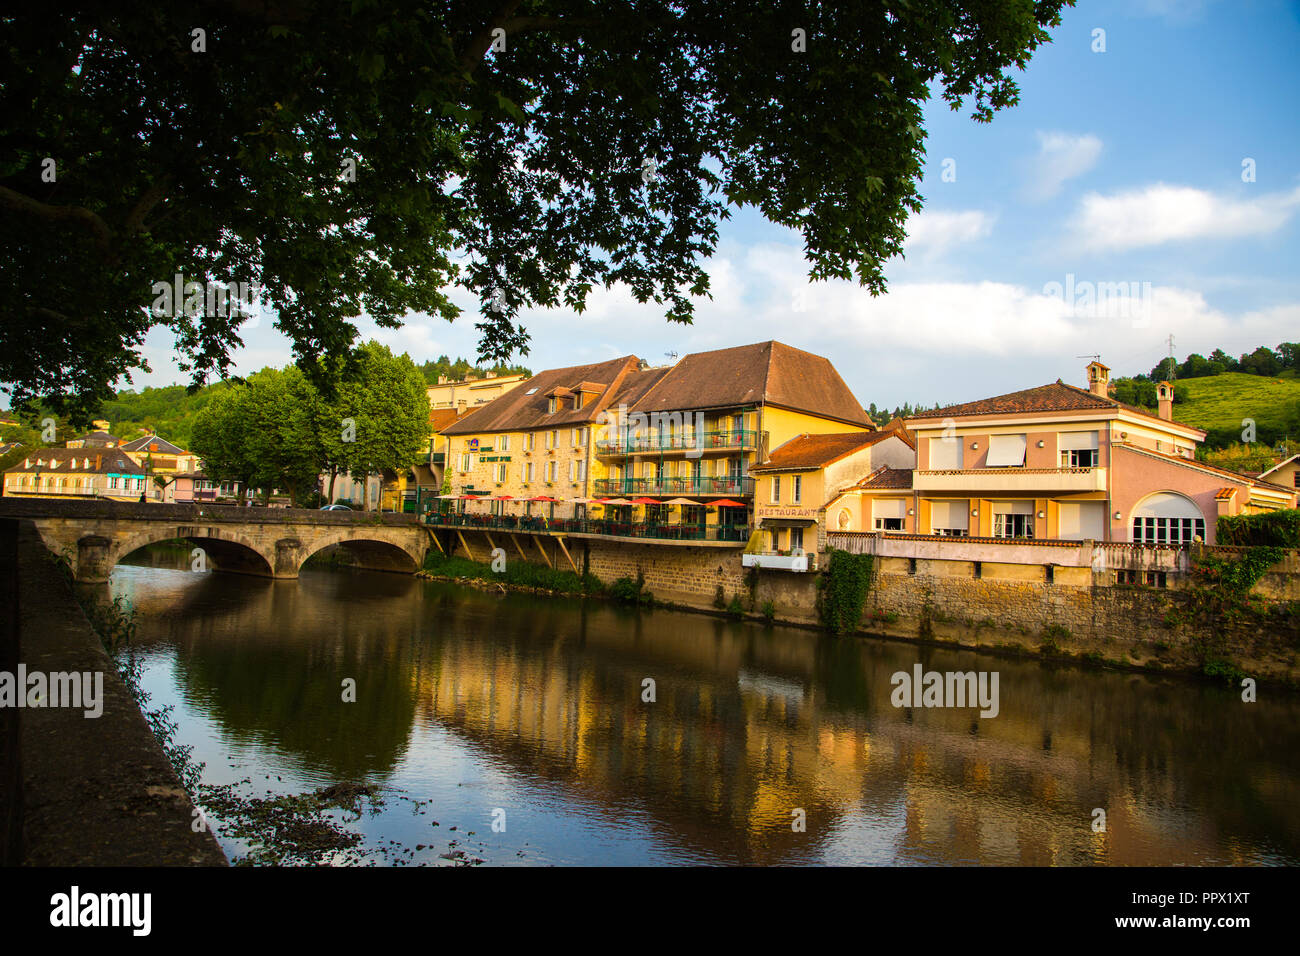 The River Cele flowing through the picturesque town of Figeac in south-west France. Stock Photo